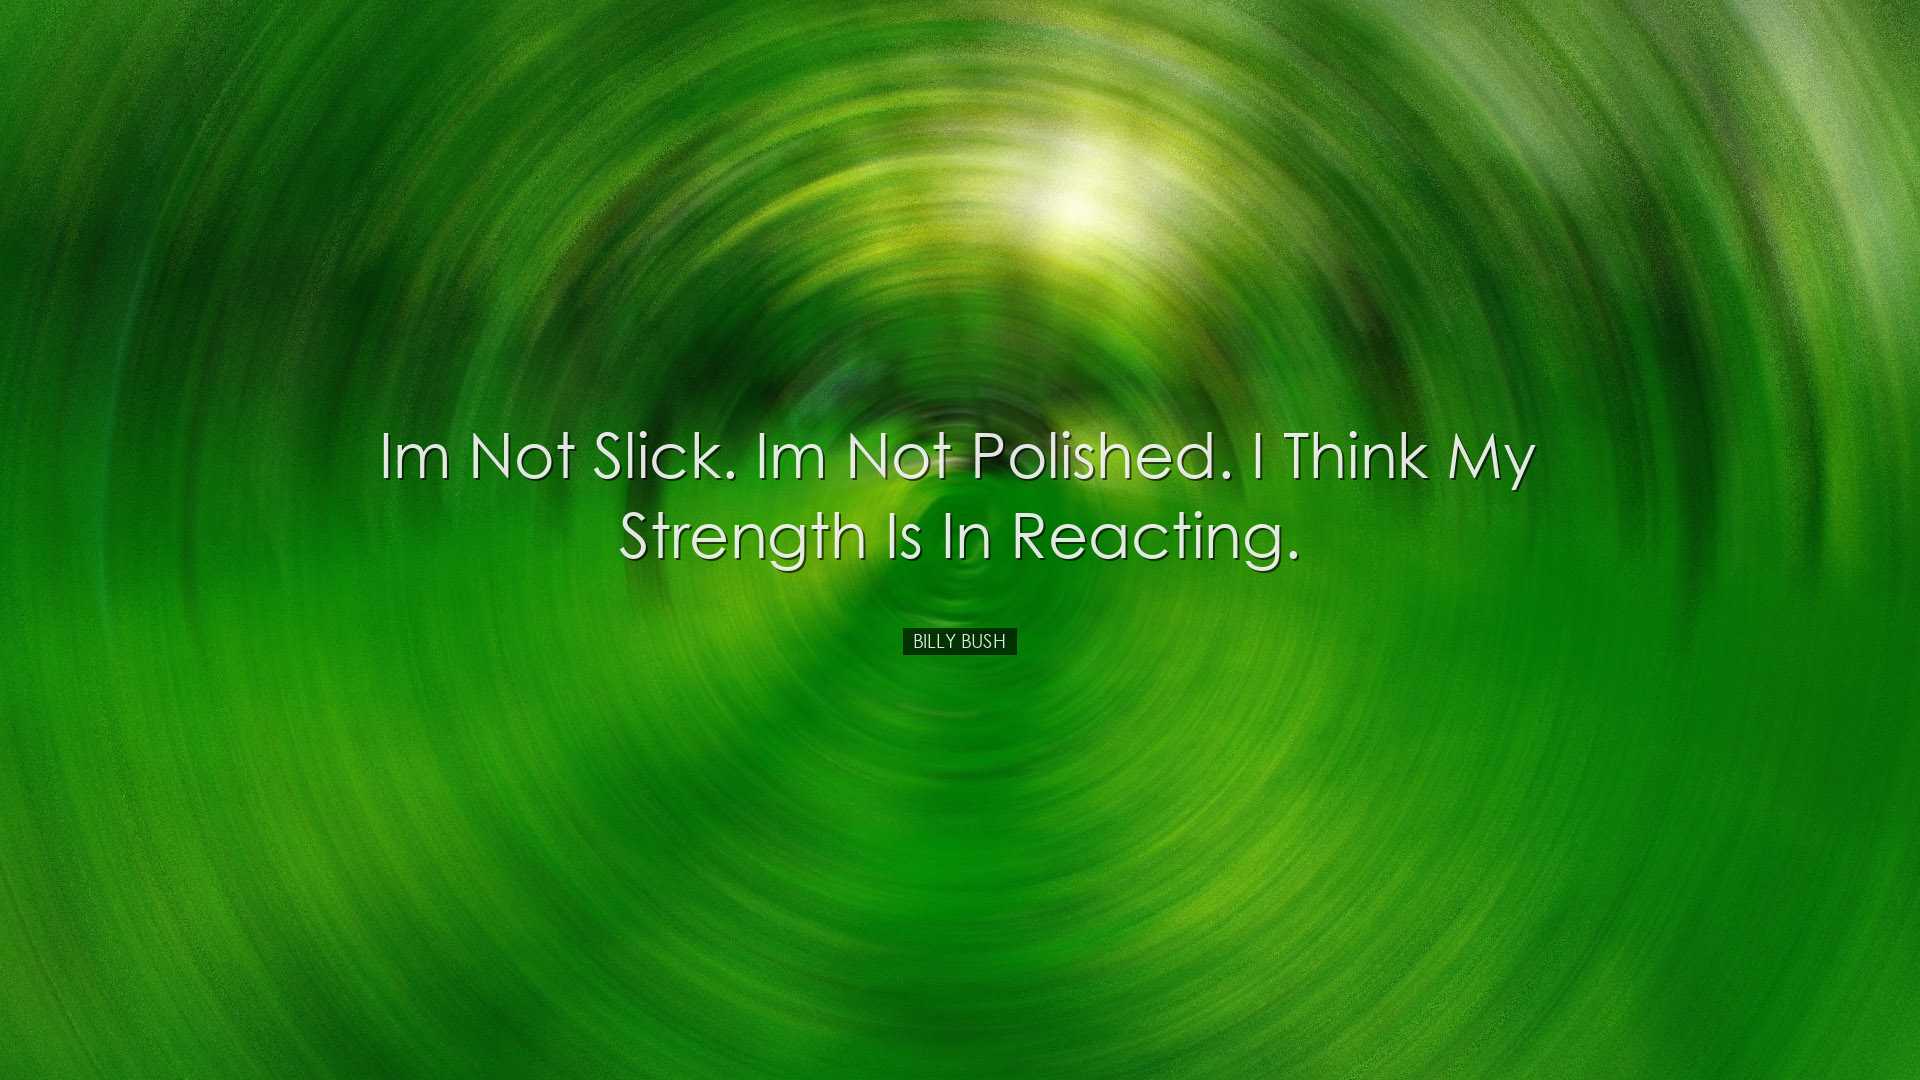 Im not slick. Im not polished. I think my strength is in reacting.